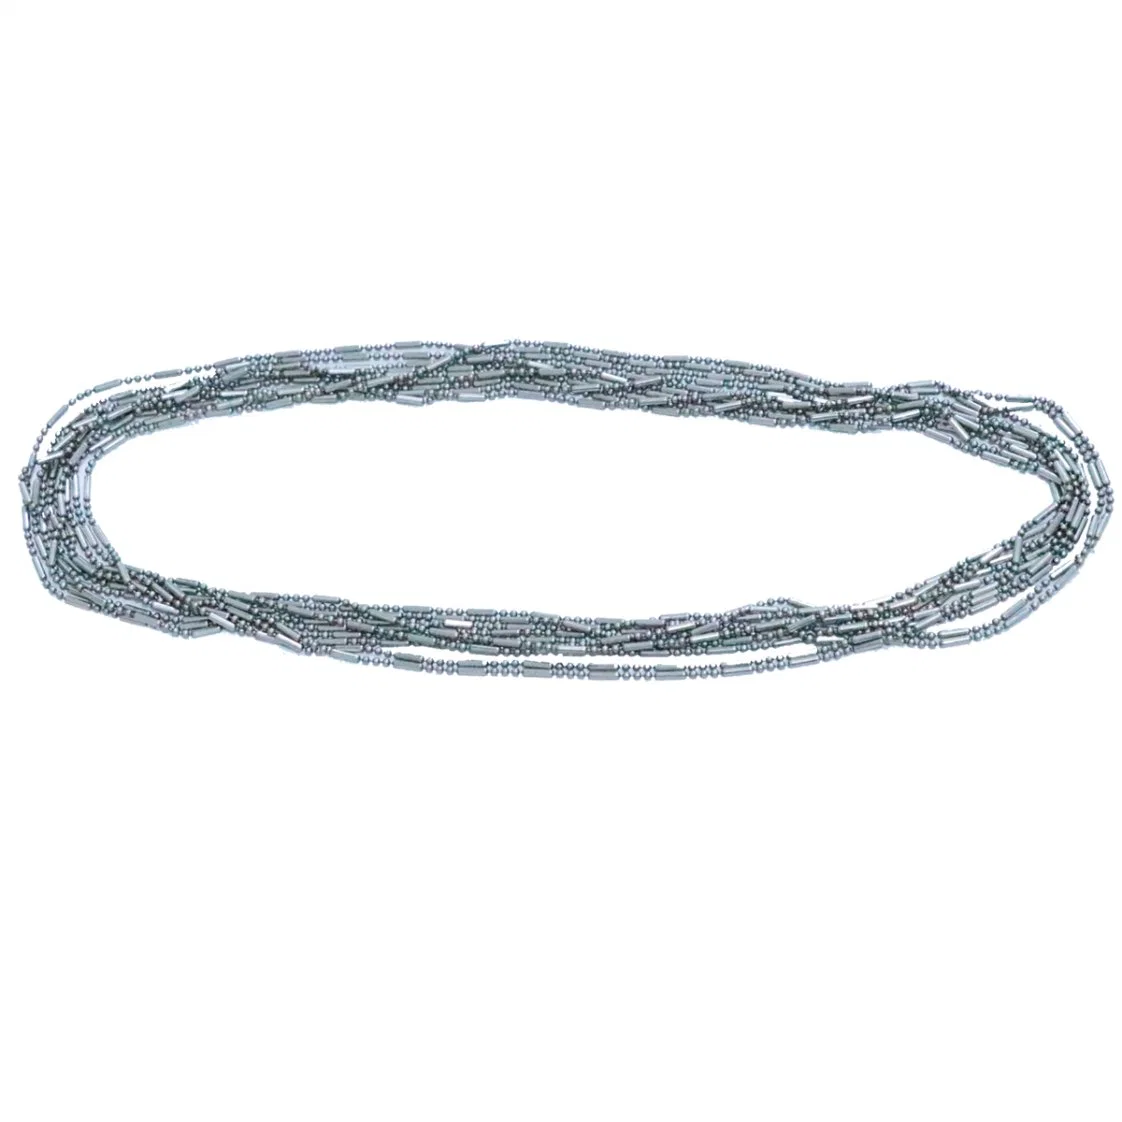 Stainless Steel Chain Galvanized Welded Steel Long Link Metal Chain